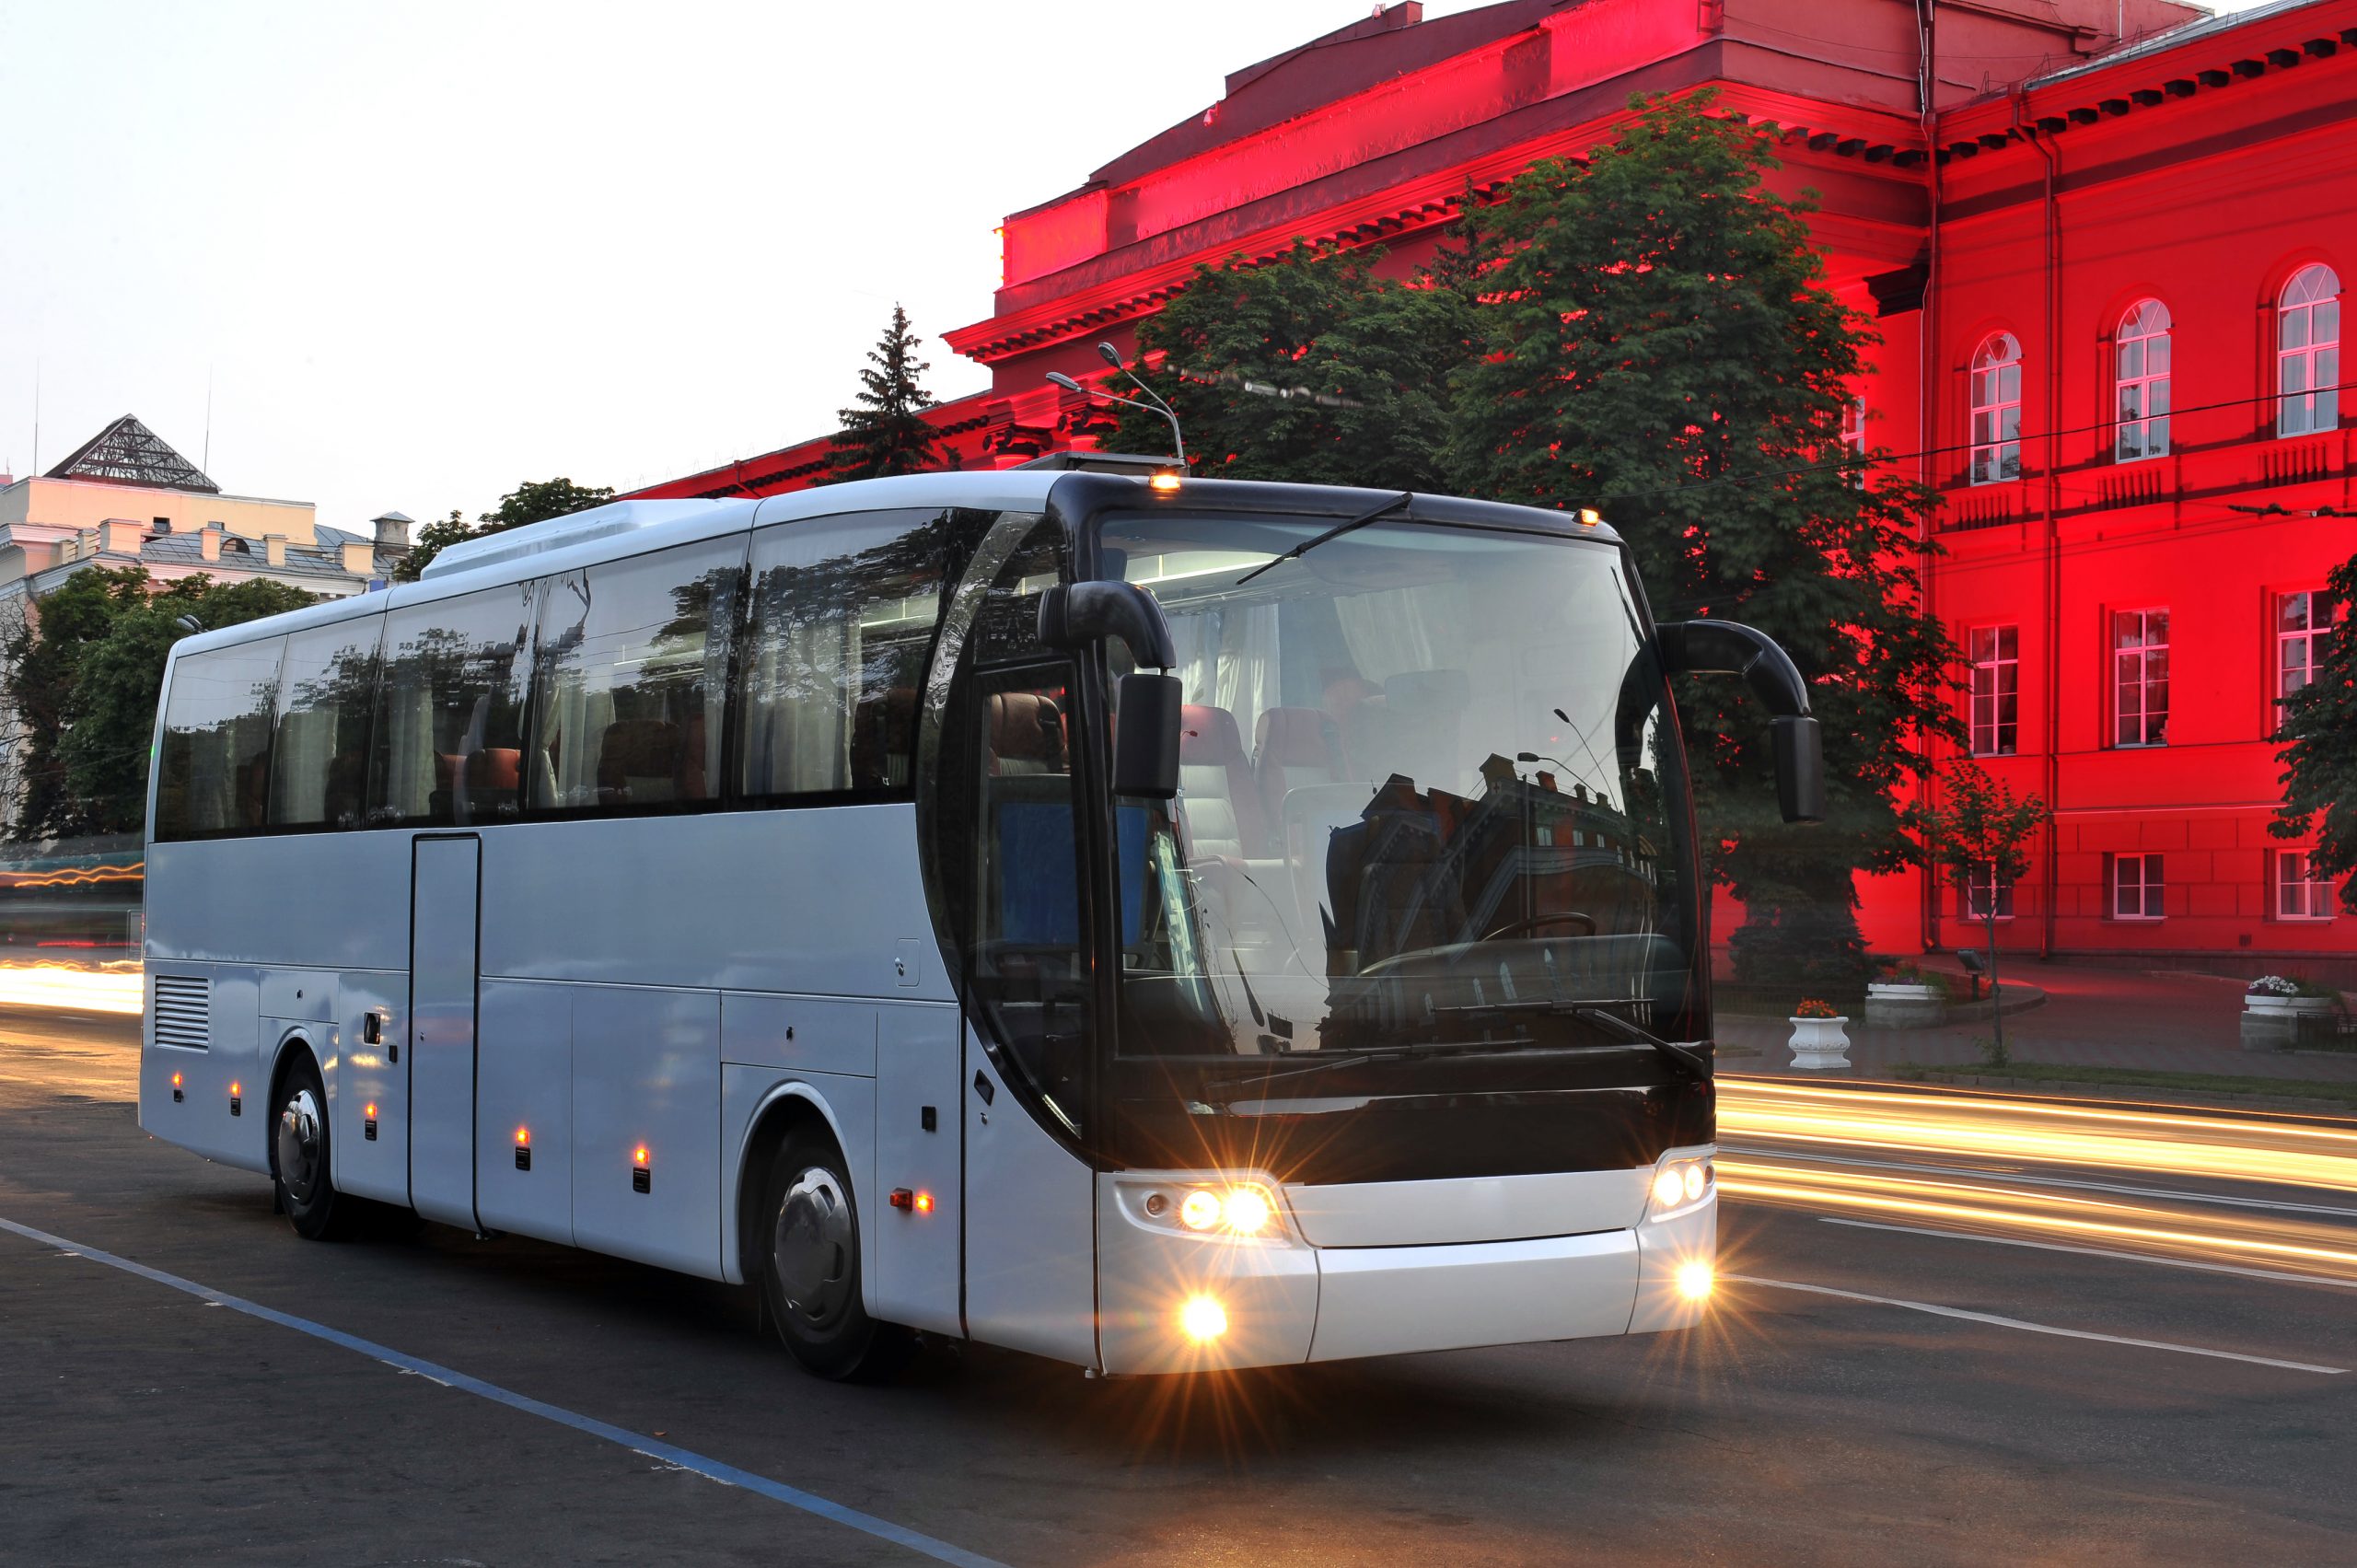 Coach in Europe with illuminated building